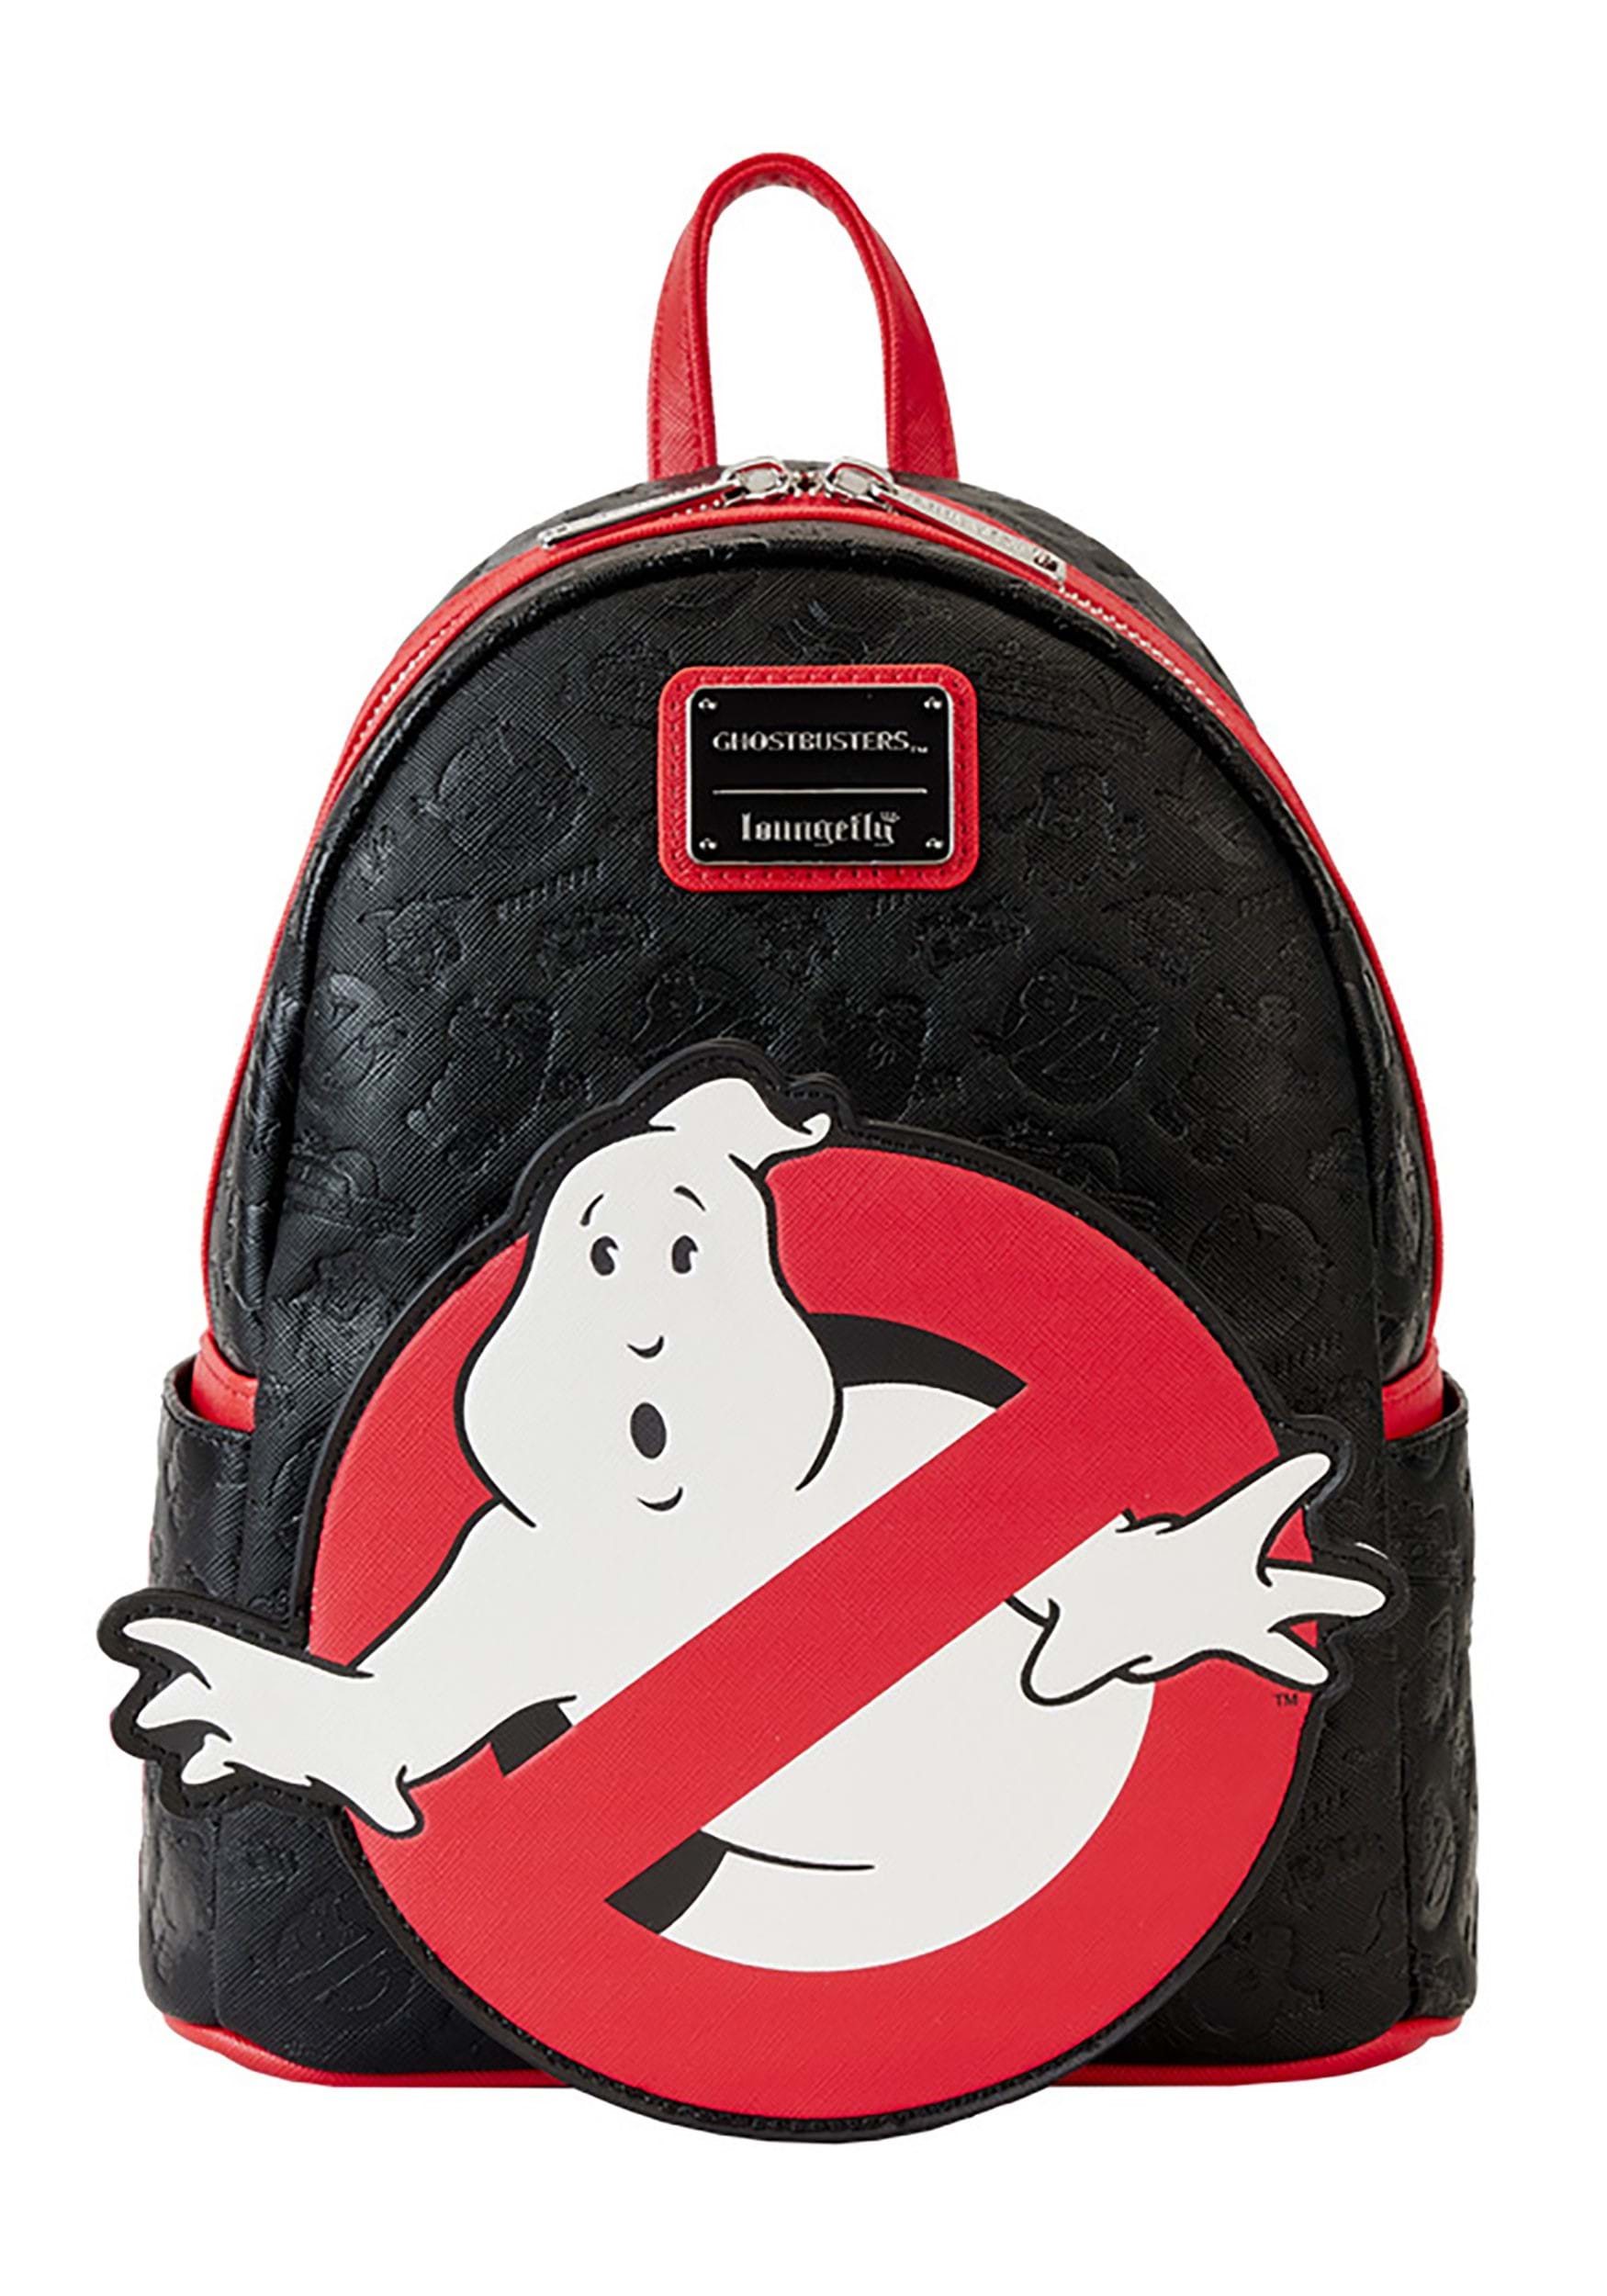 Loungefly Ghostbusters No Ghost Logo Mini Backpack | Ghostbusters Backpacks